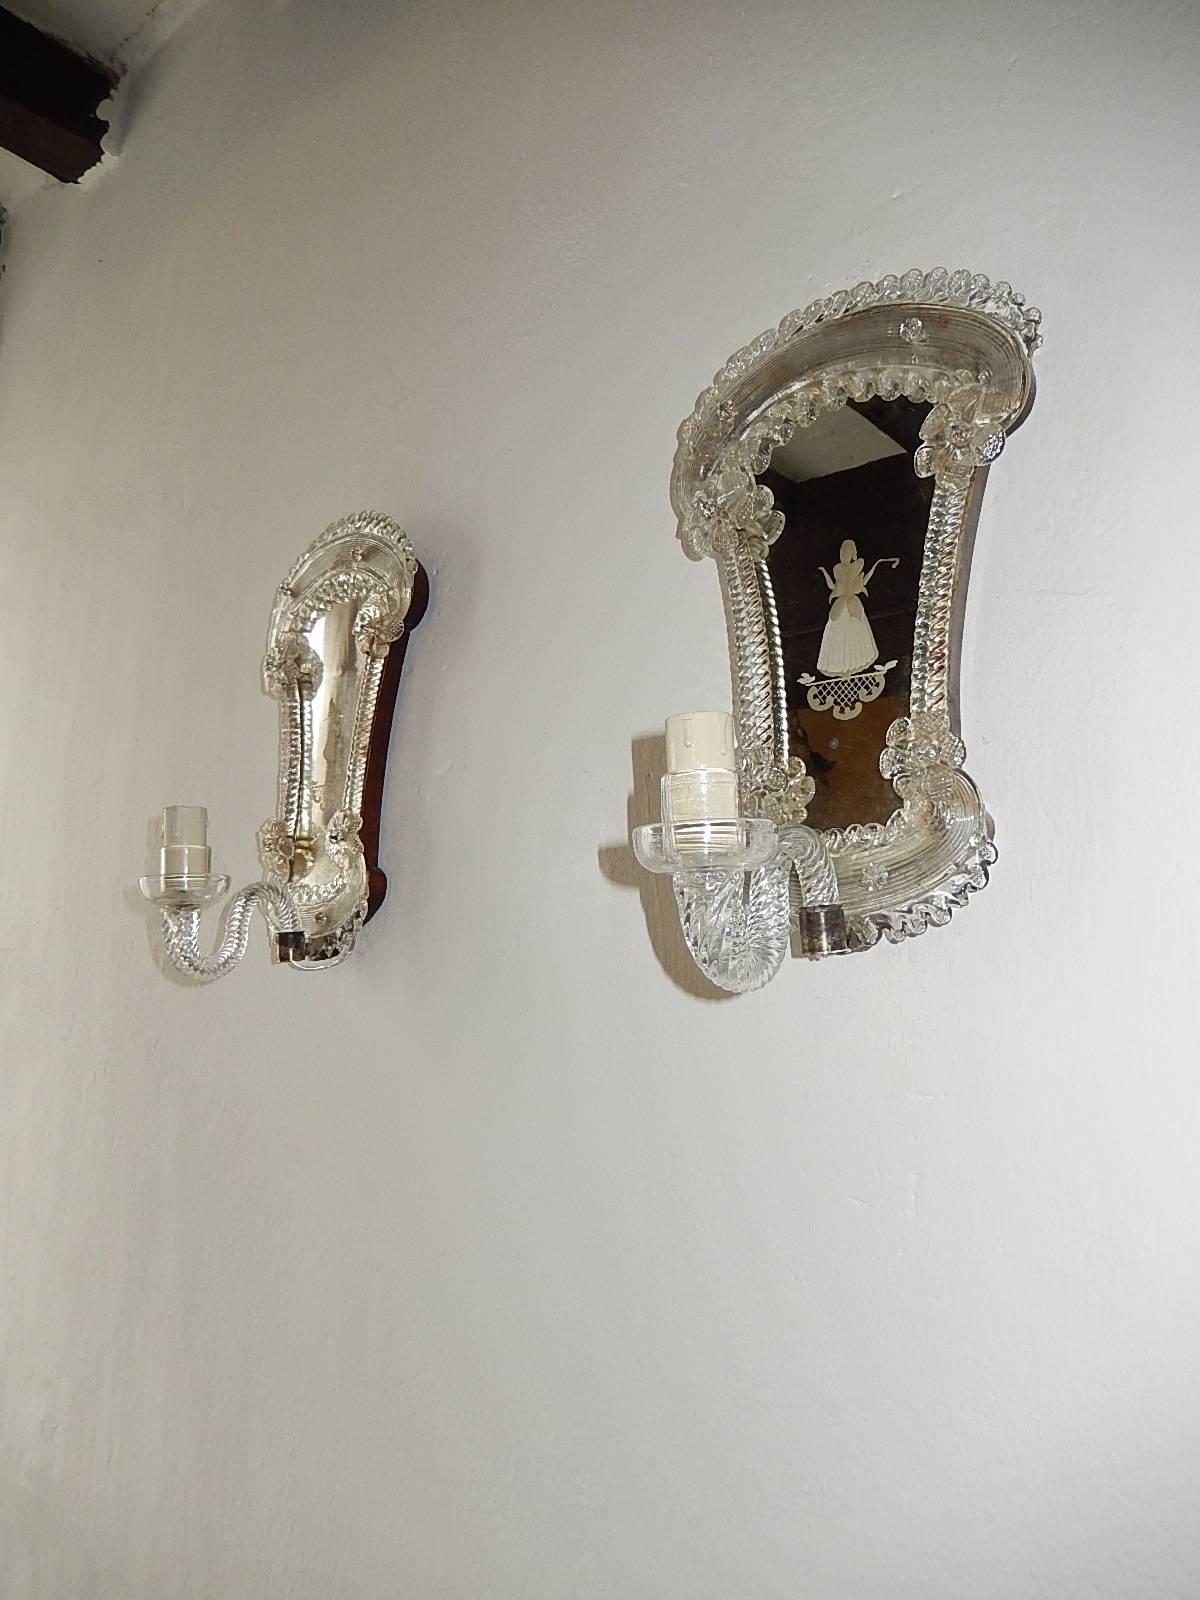 Housing one light each. Will be rewired with certified US UL sockets for the USA and appropriate sockets for all other countries and ready to hang!  Murano glass with etching of a woman and a man. Mirrors are in great shape. Free priority UPS